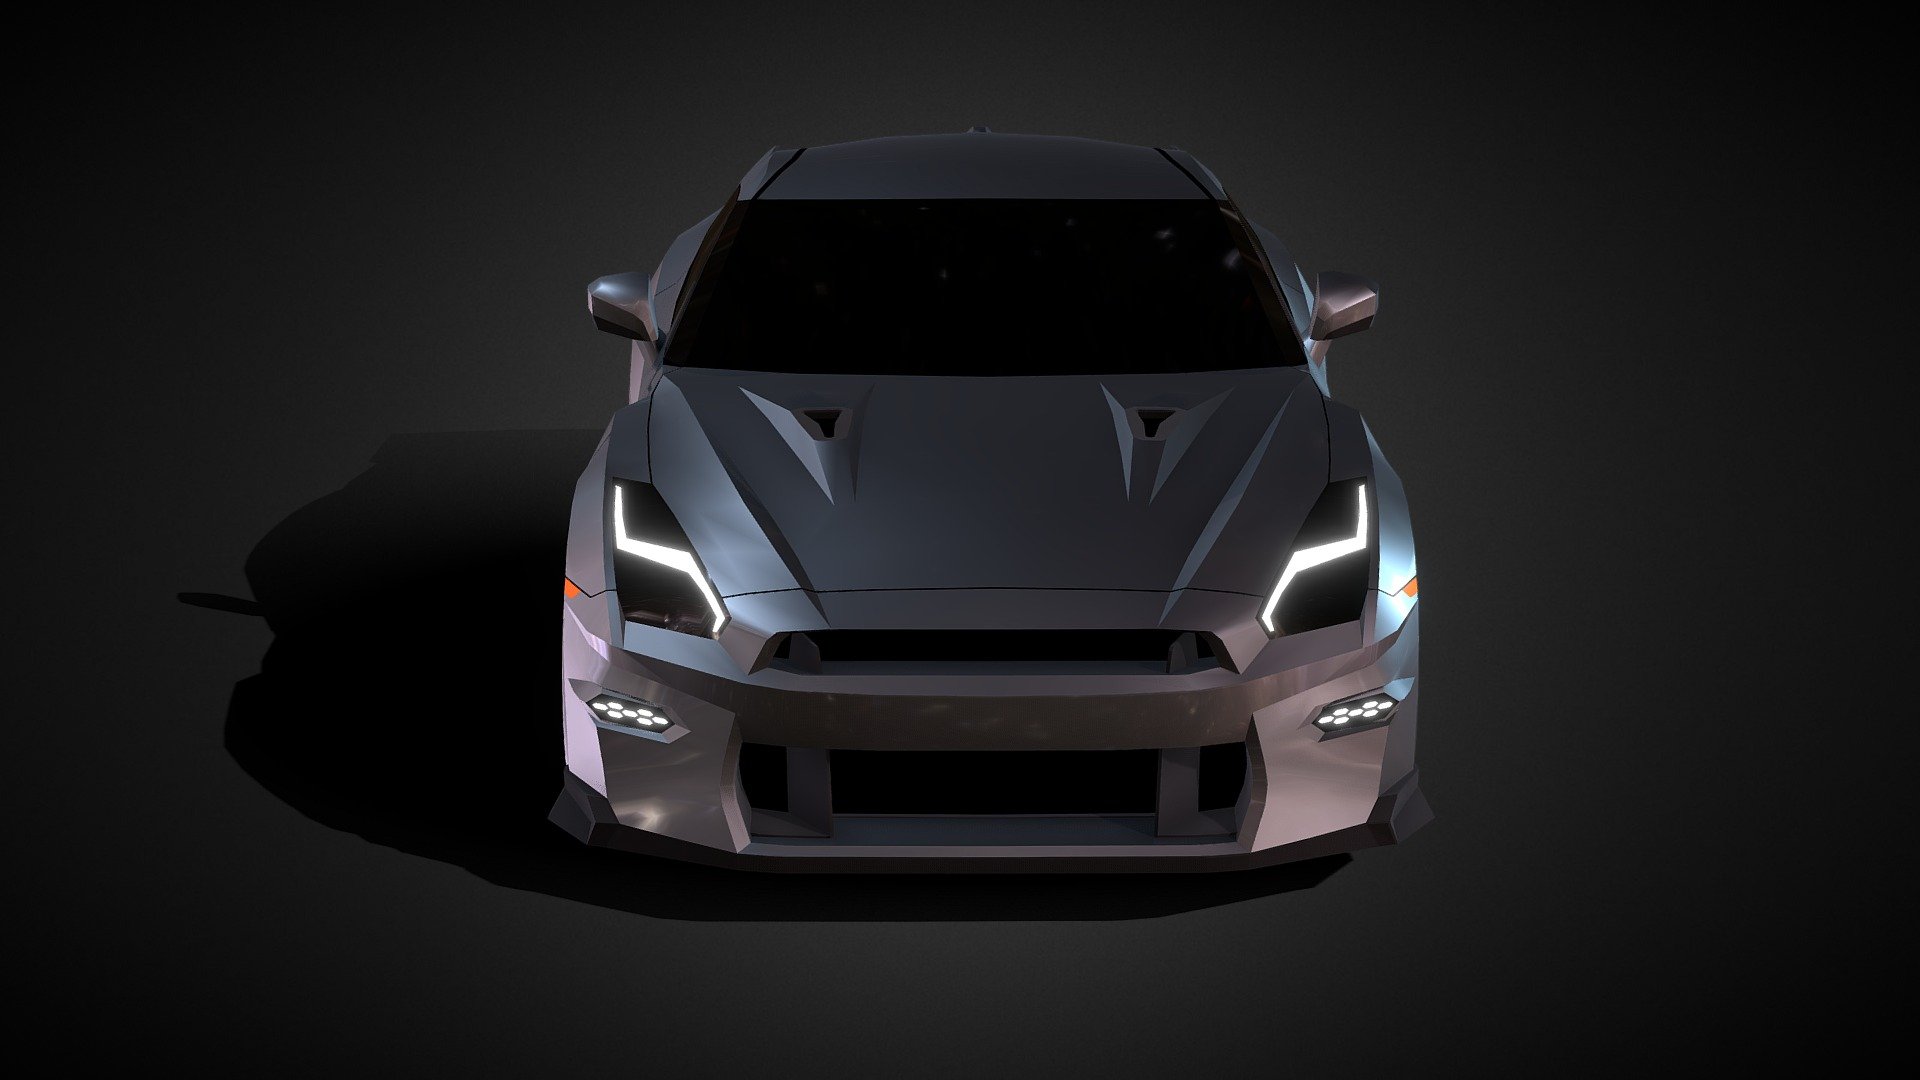 Low-poly 3D model of Nissan GT-R 2024 created in Blender 3.6

Polygons: 6,158 / Vertices: 6,749 / Triangles: 13,242 - Nissan GT-R 2024 (low-poly) - 3D model by Rossty (@rossty3d) 3d model